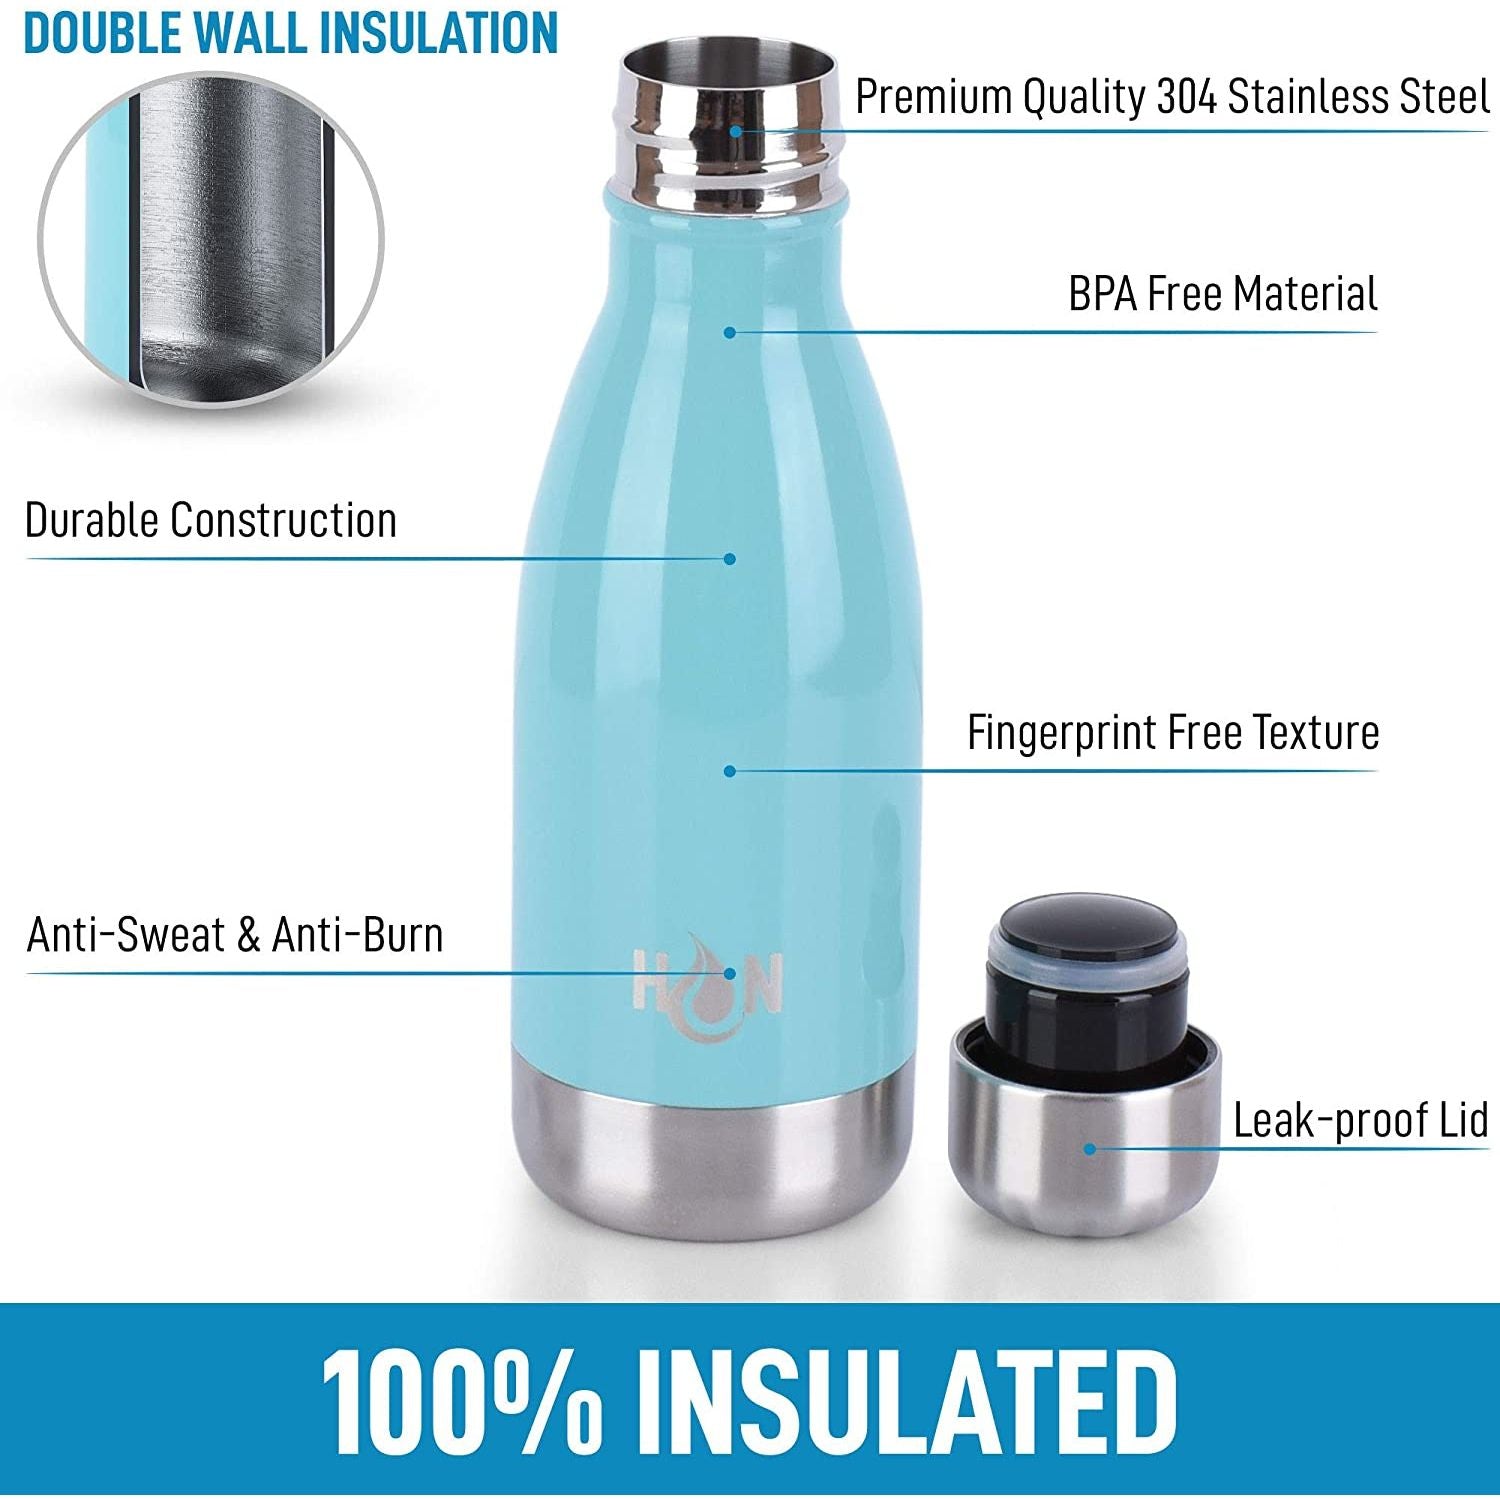 High quality Hydration Nation Double Wall Insulated Water Bottle